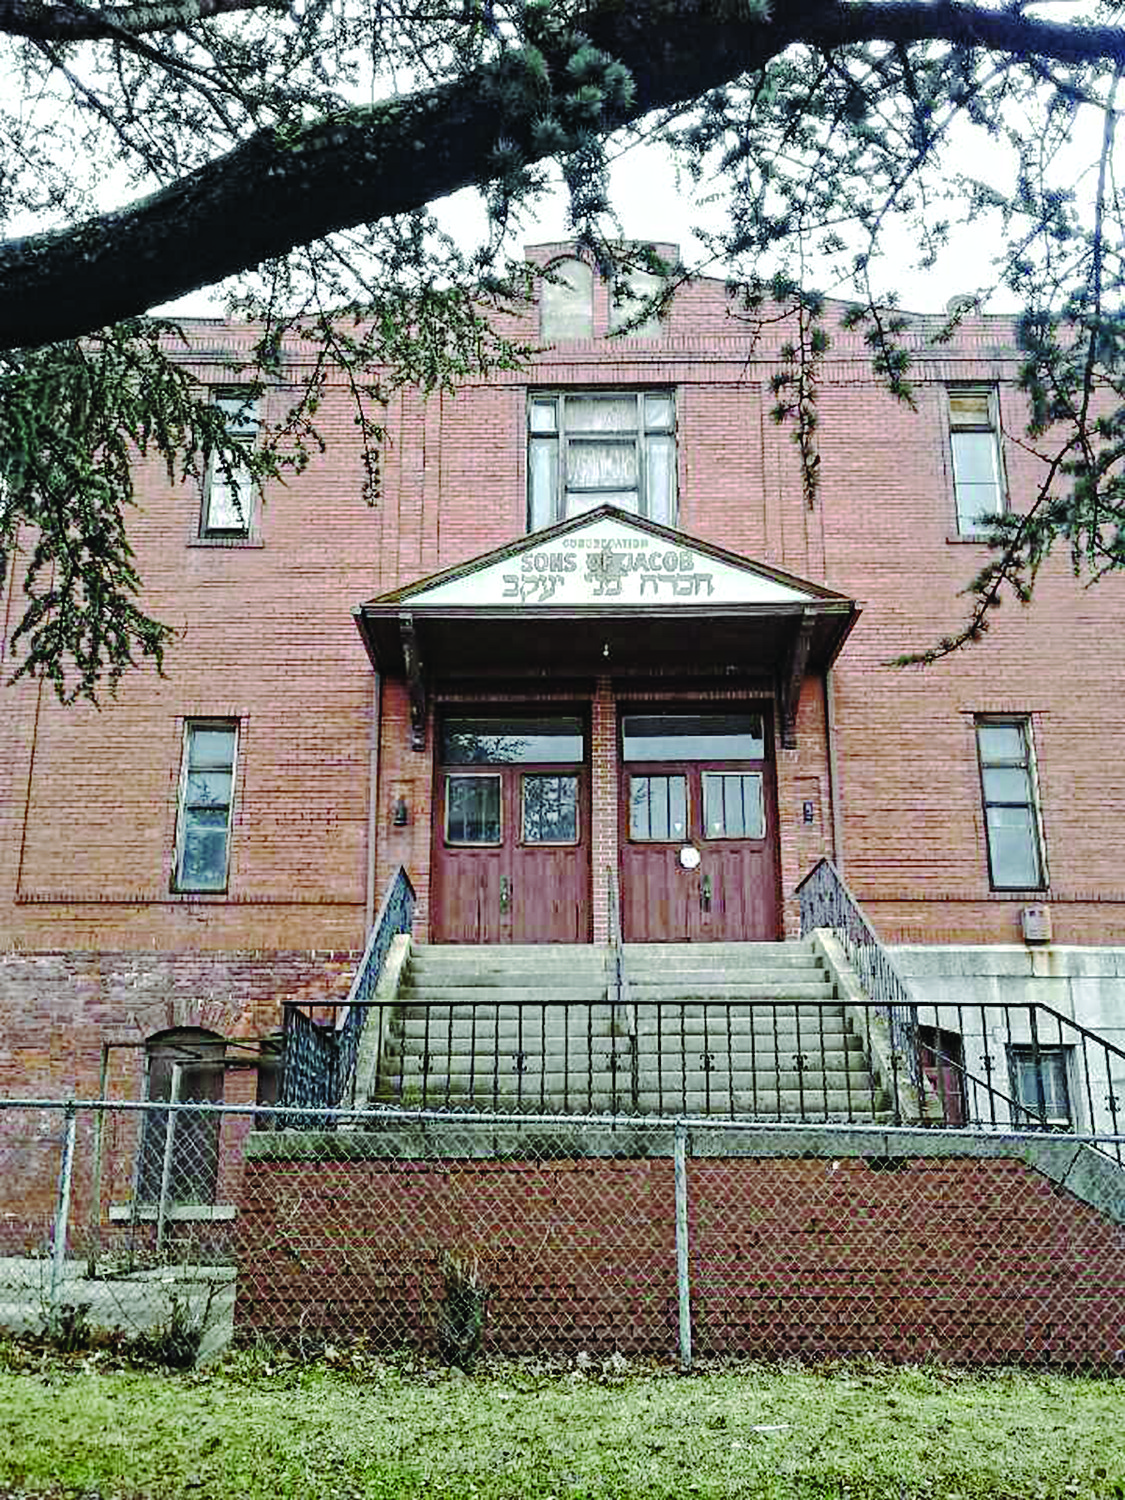 The historic Sons of Jacob Synagogue